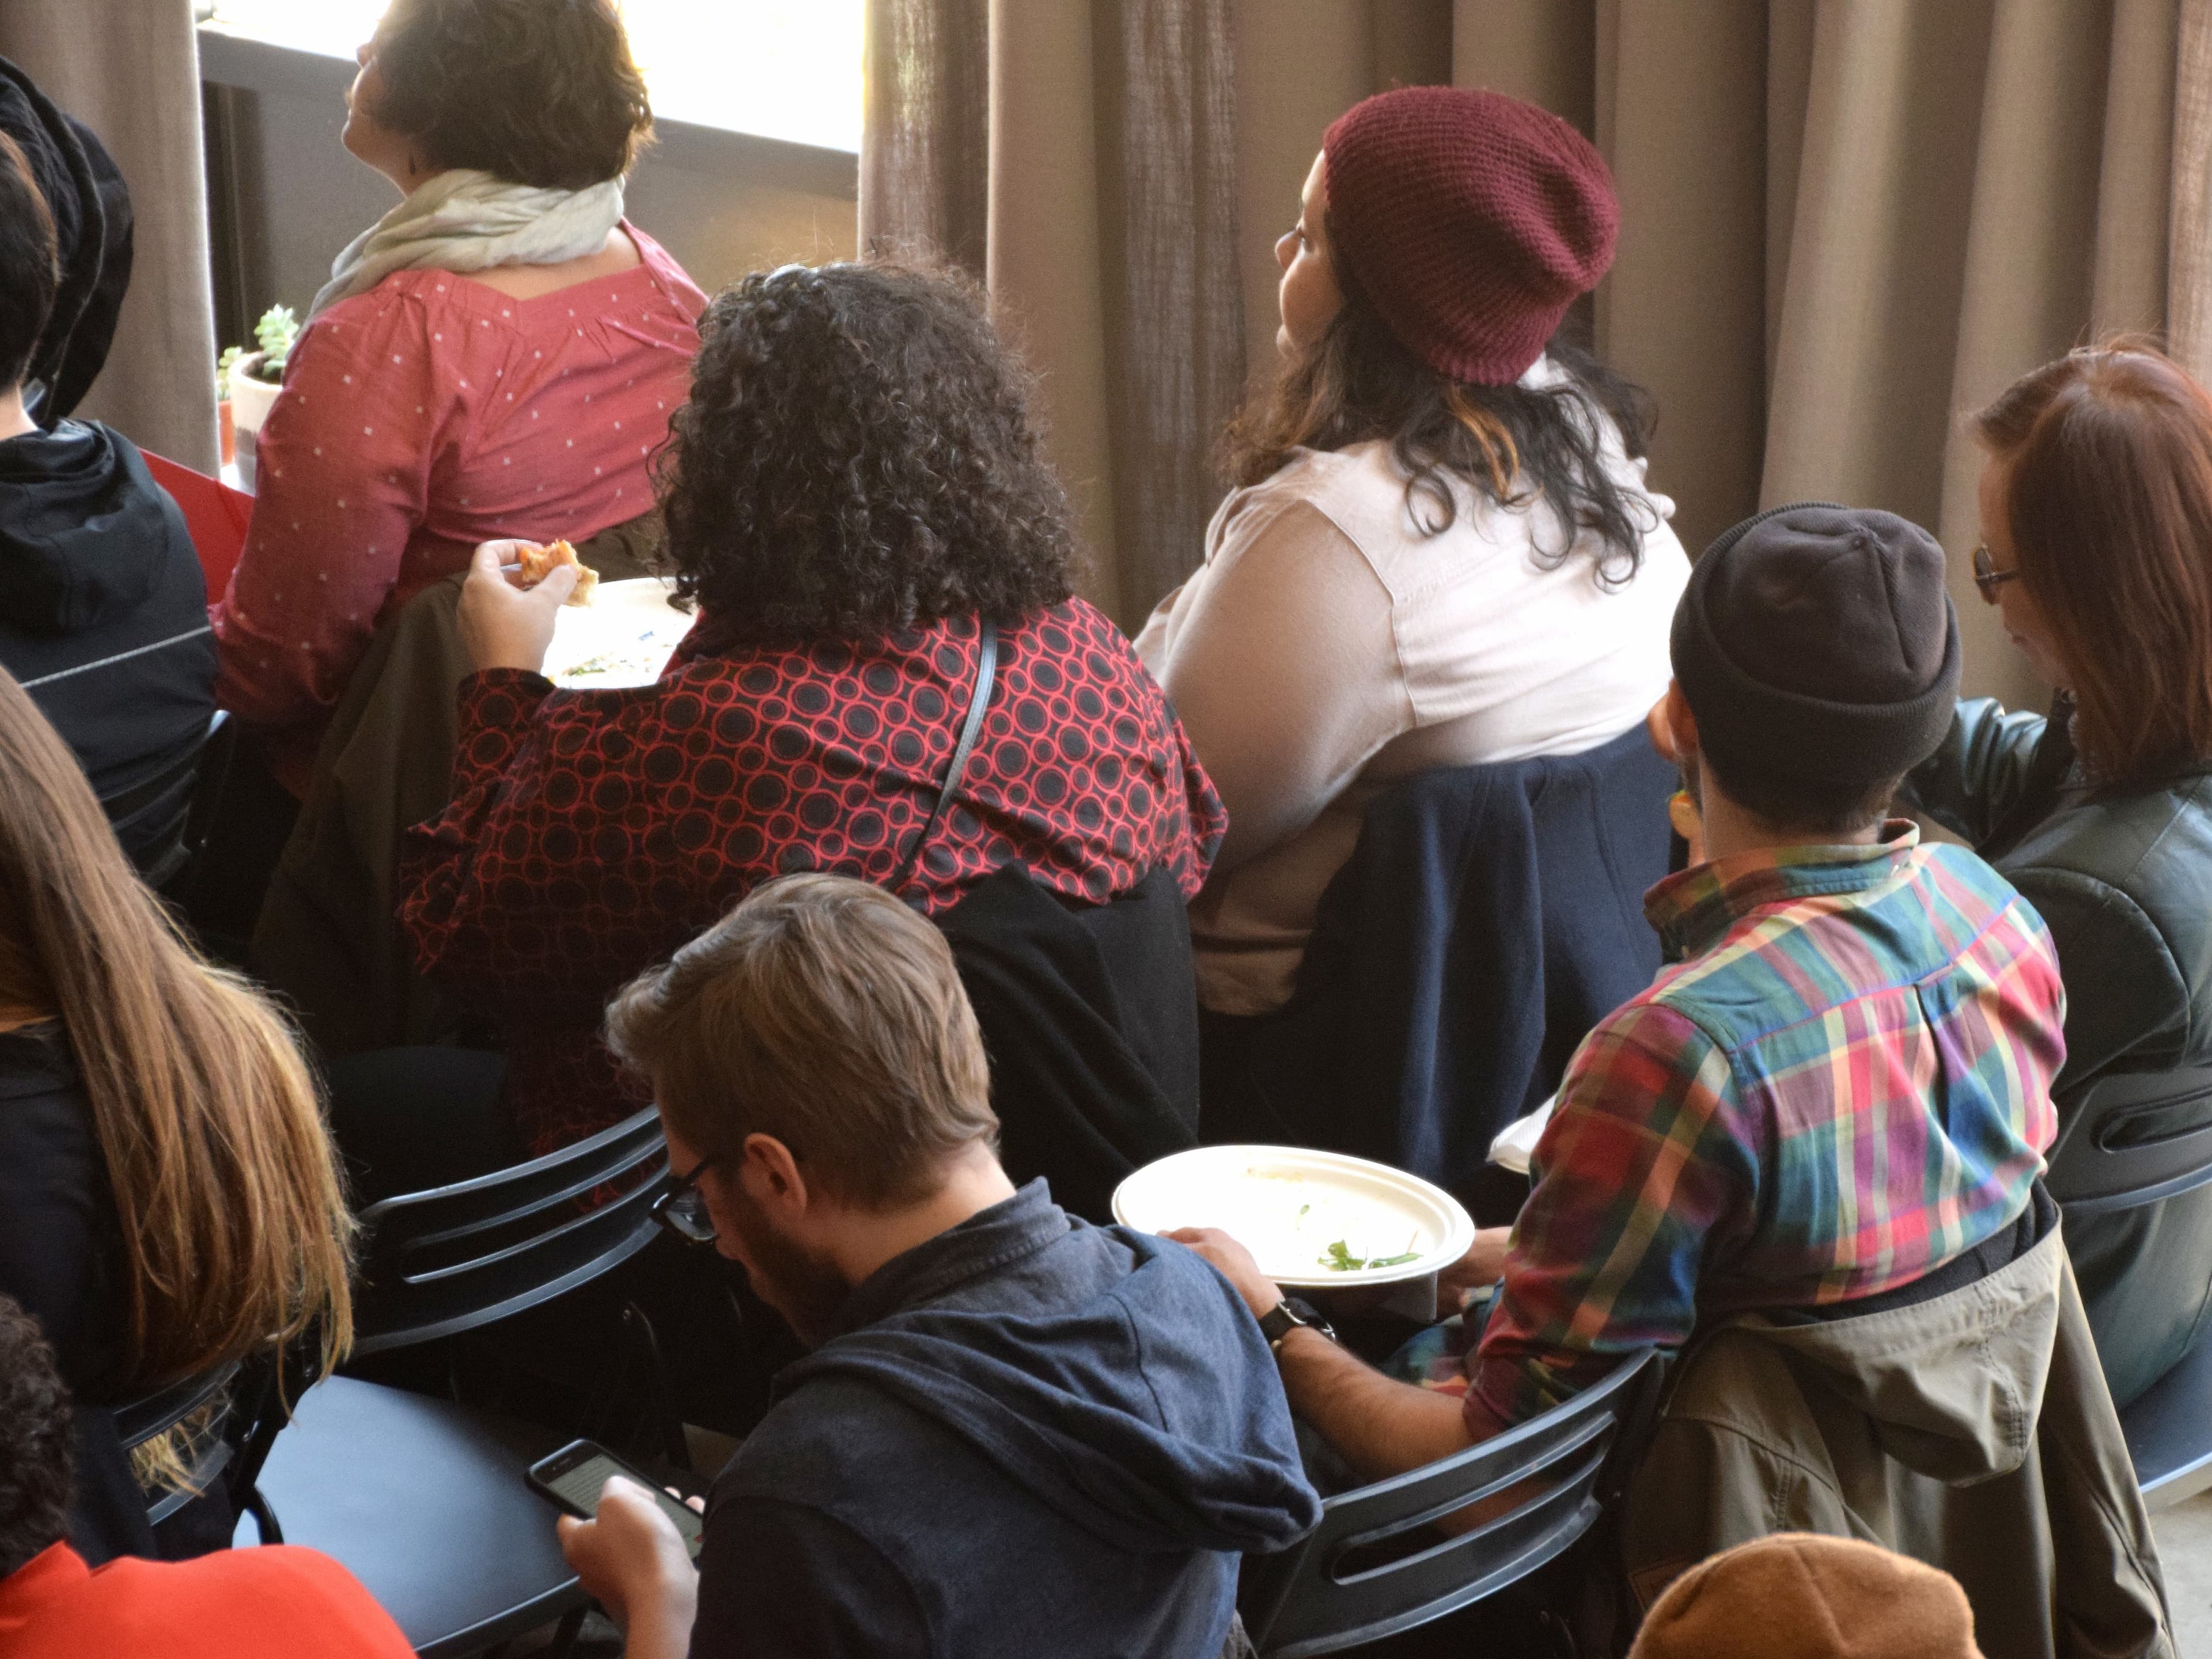 A group of people are seated closely together in chairs, facing away from the camera. Some are eating off plates, others are looking at their phones. One person wears a red beanie, another a black beanie, and multiple others have jackets on the backs of their chairs.